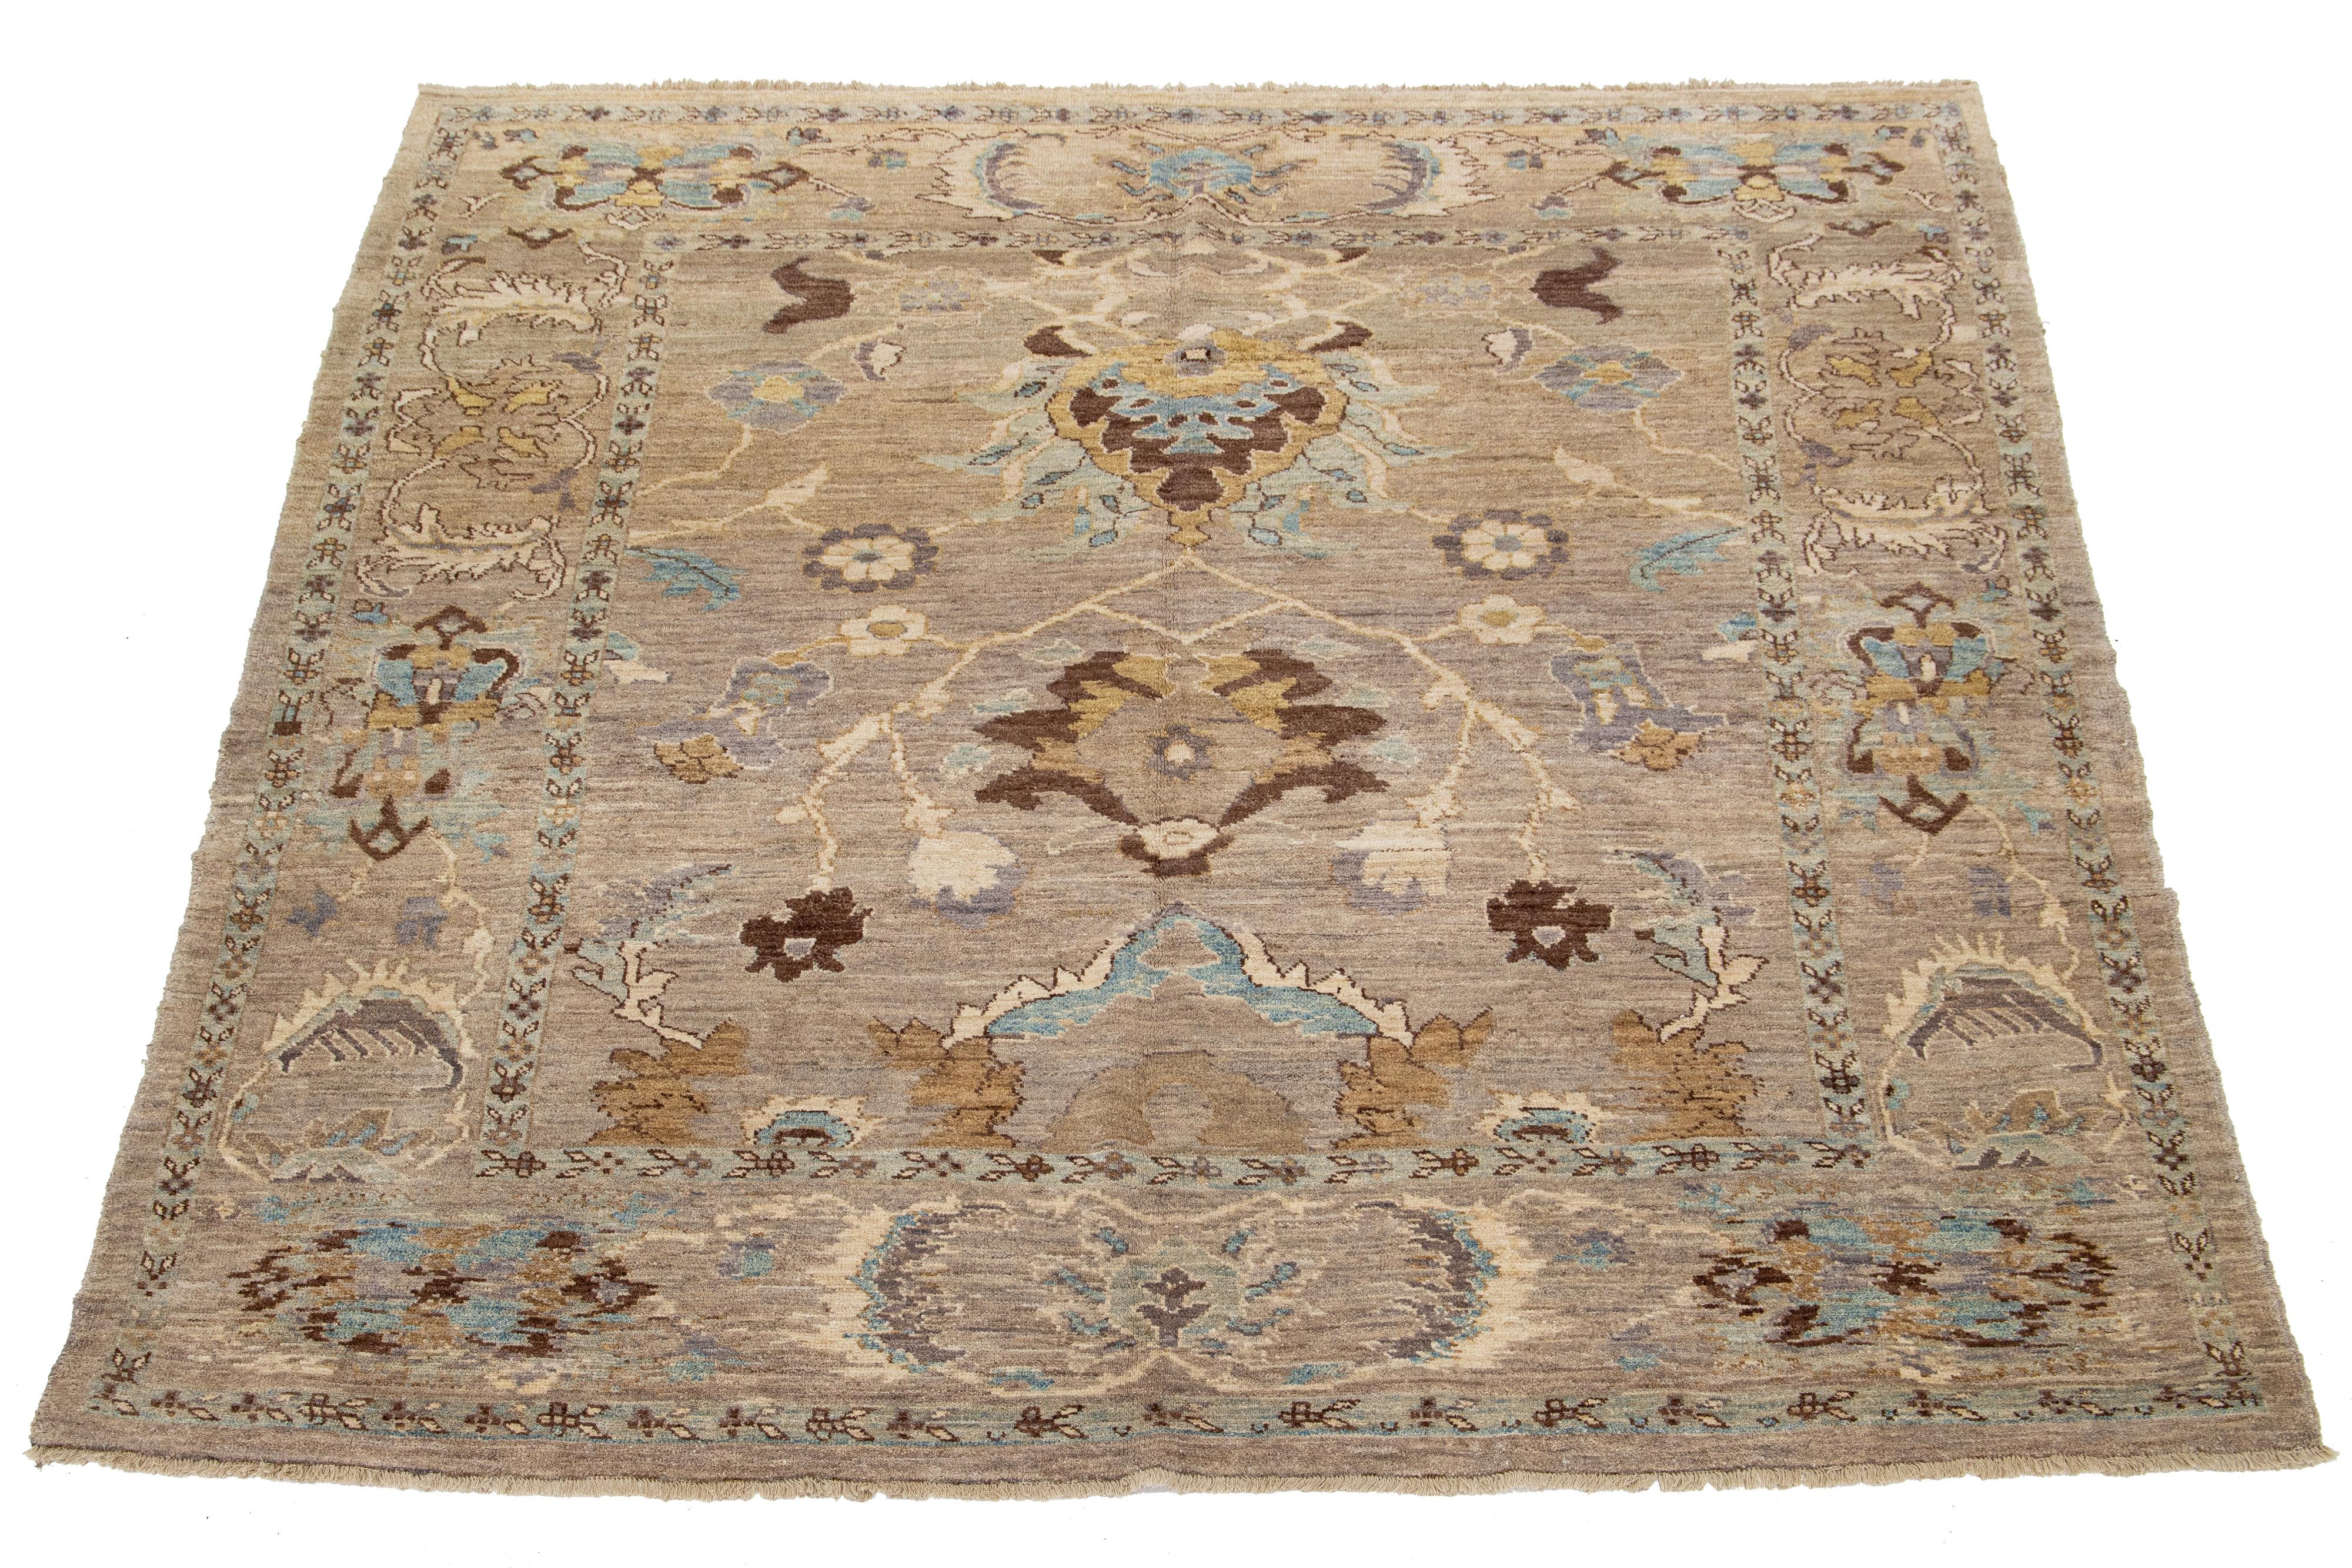 This is a Persian wool rug, hand-knotted and featuring a lovely design in blue, beige, and brown on a light brown field.

This rug measures at 8'1